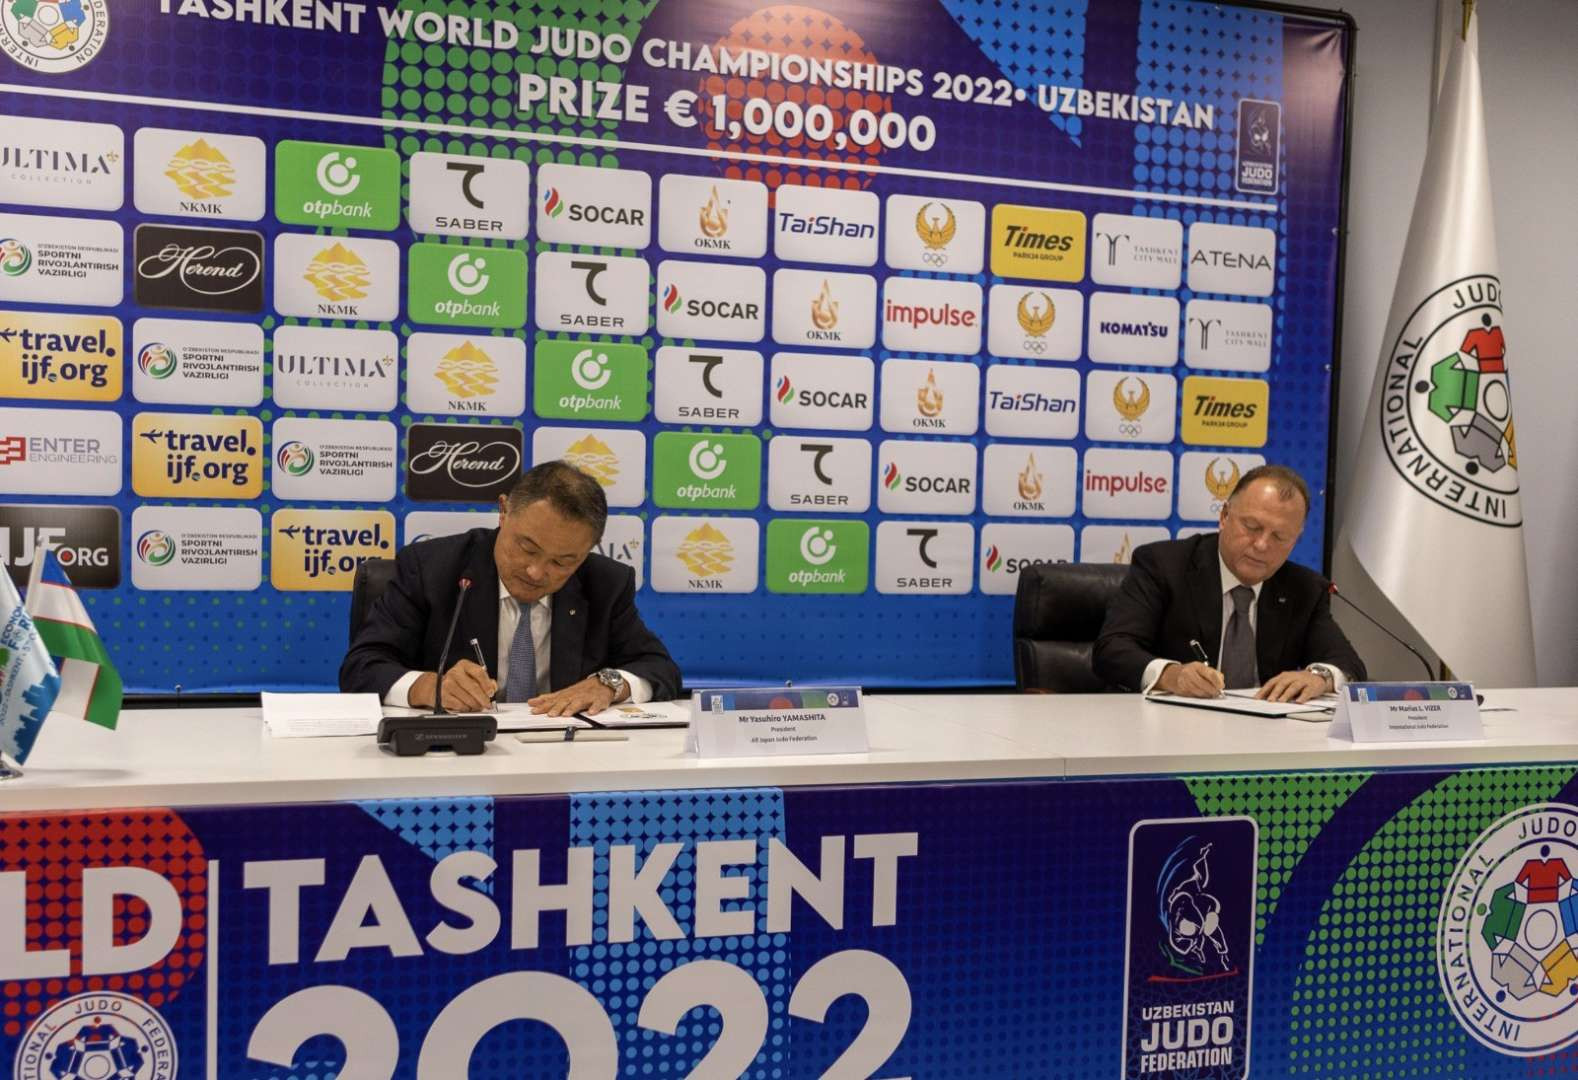 The contract signed between the two organisations confirms Tokyo's hosting of Grand Slam events in 2022 and 2023 ©IJF